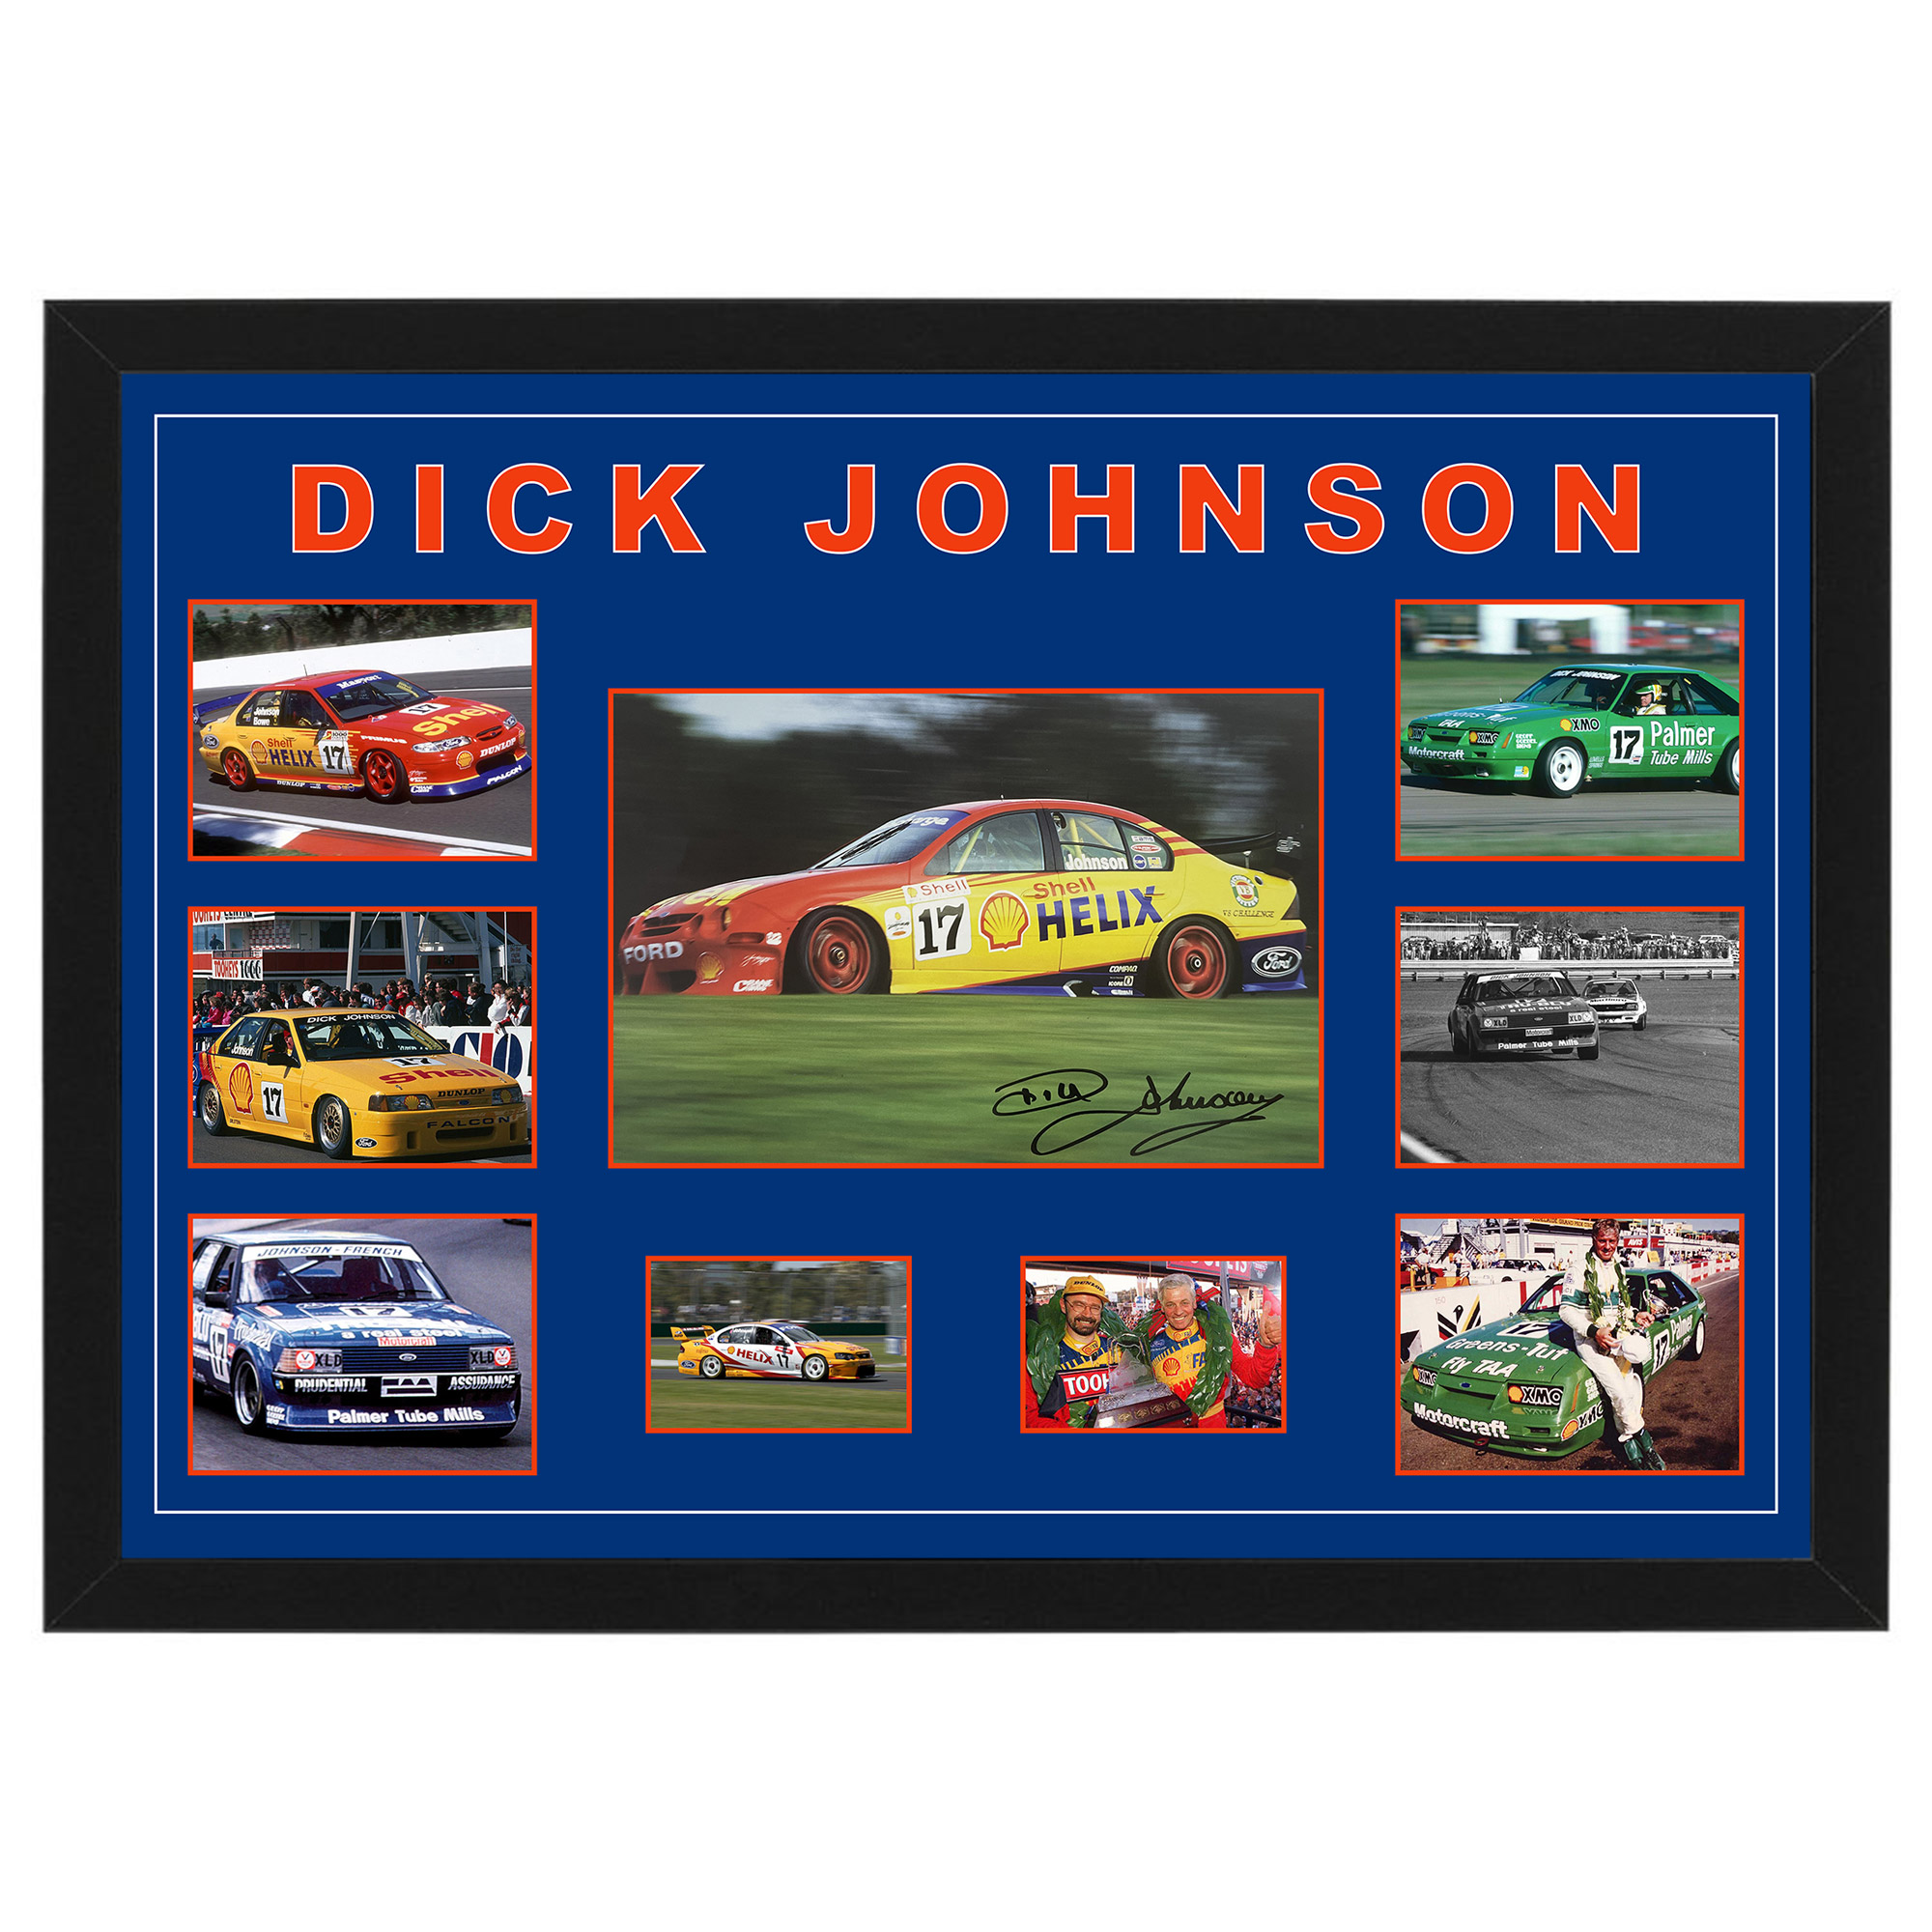 Dick Johnson Hand Signed & Framed Ford Photograph